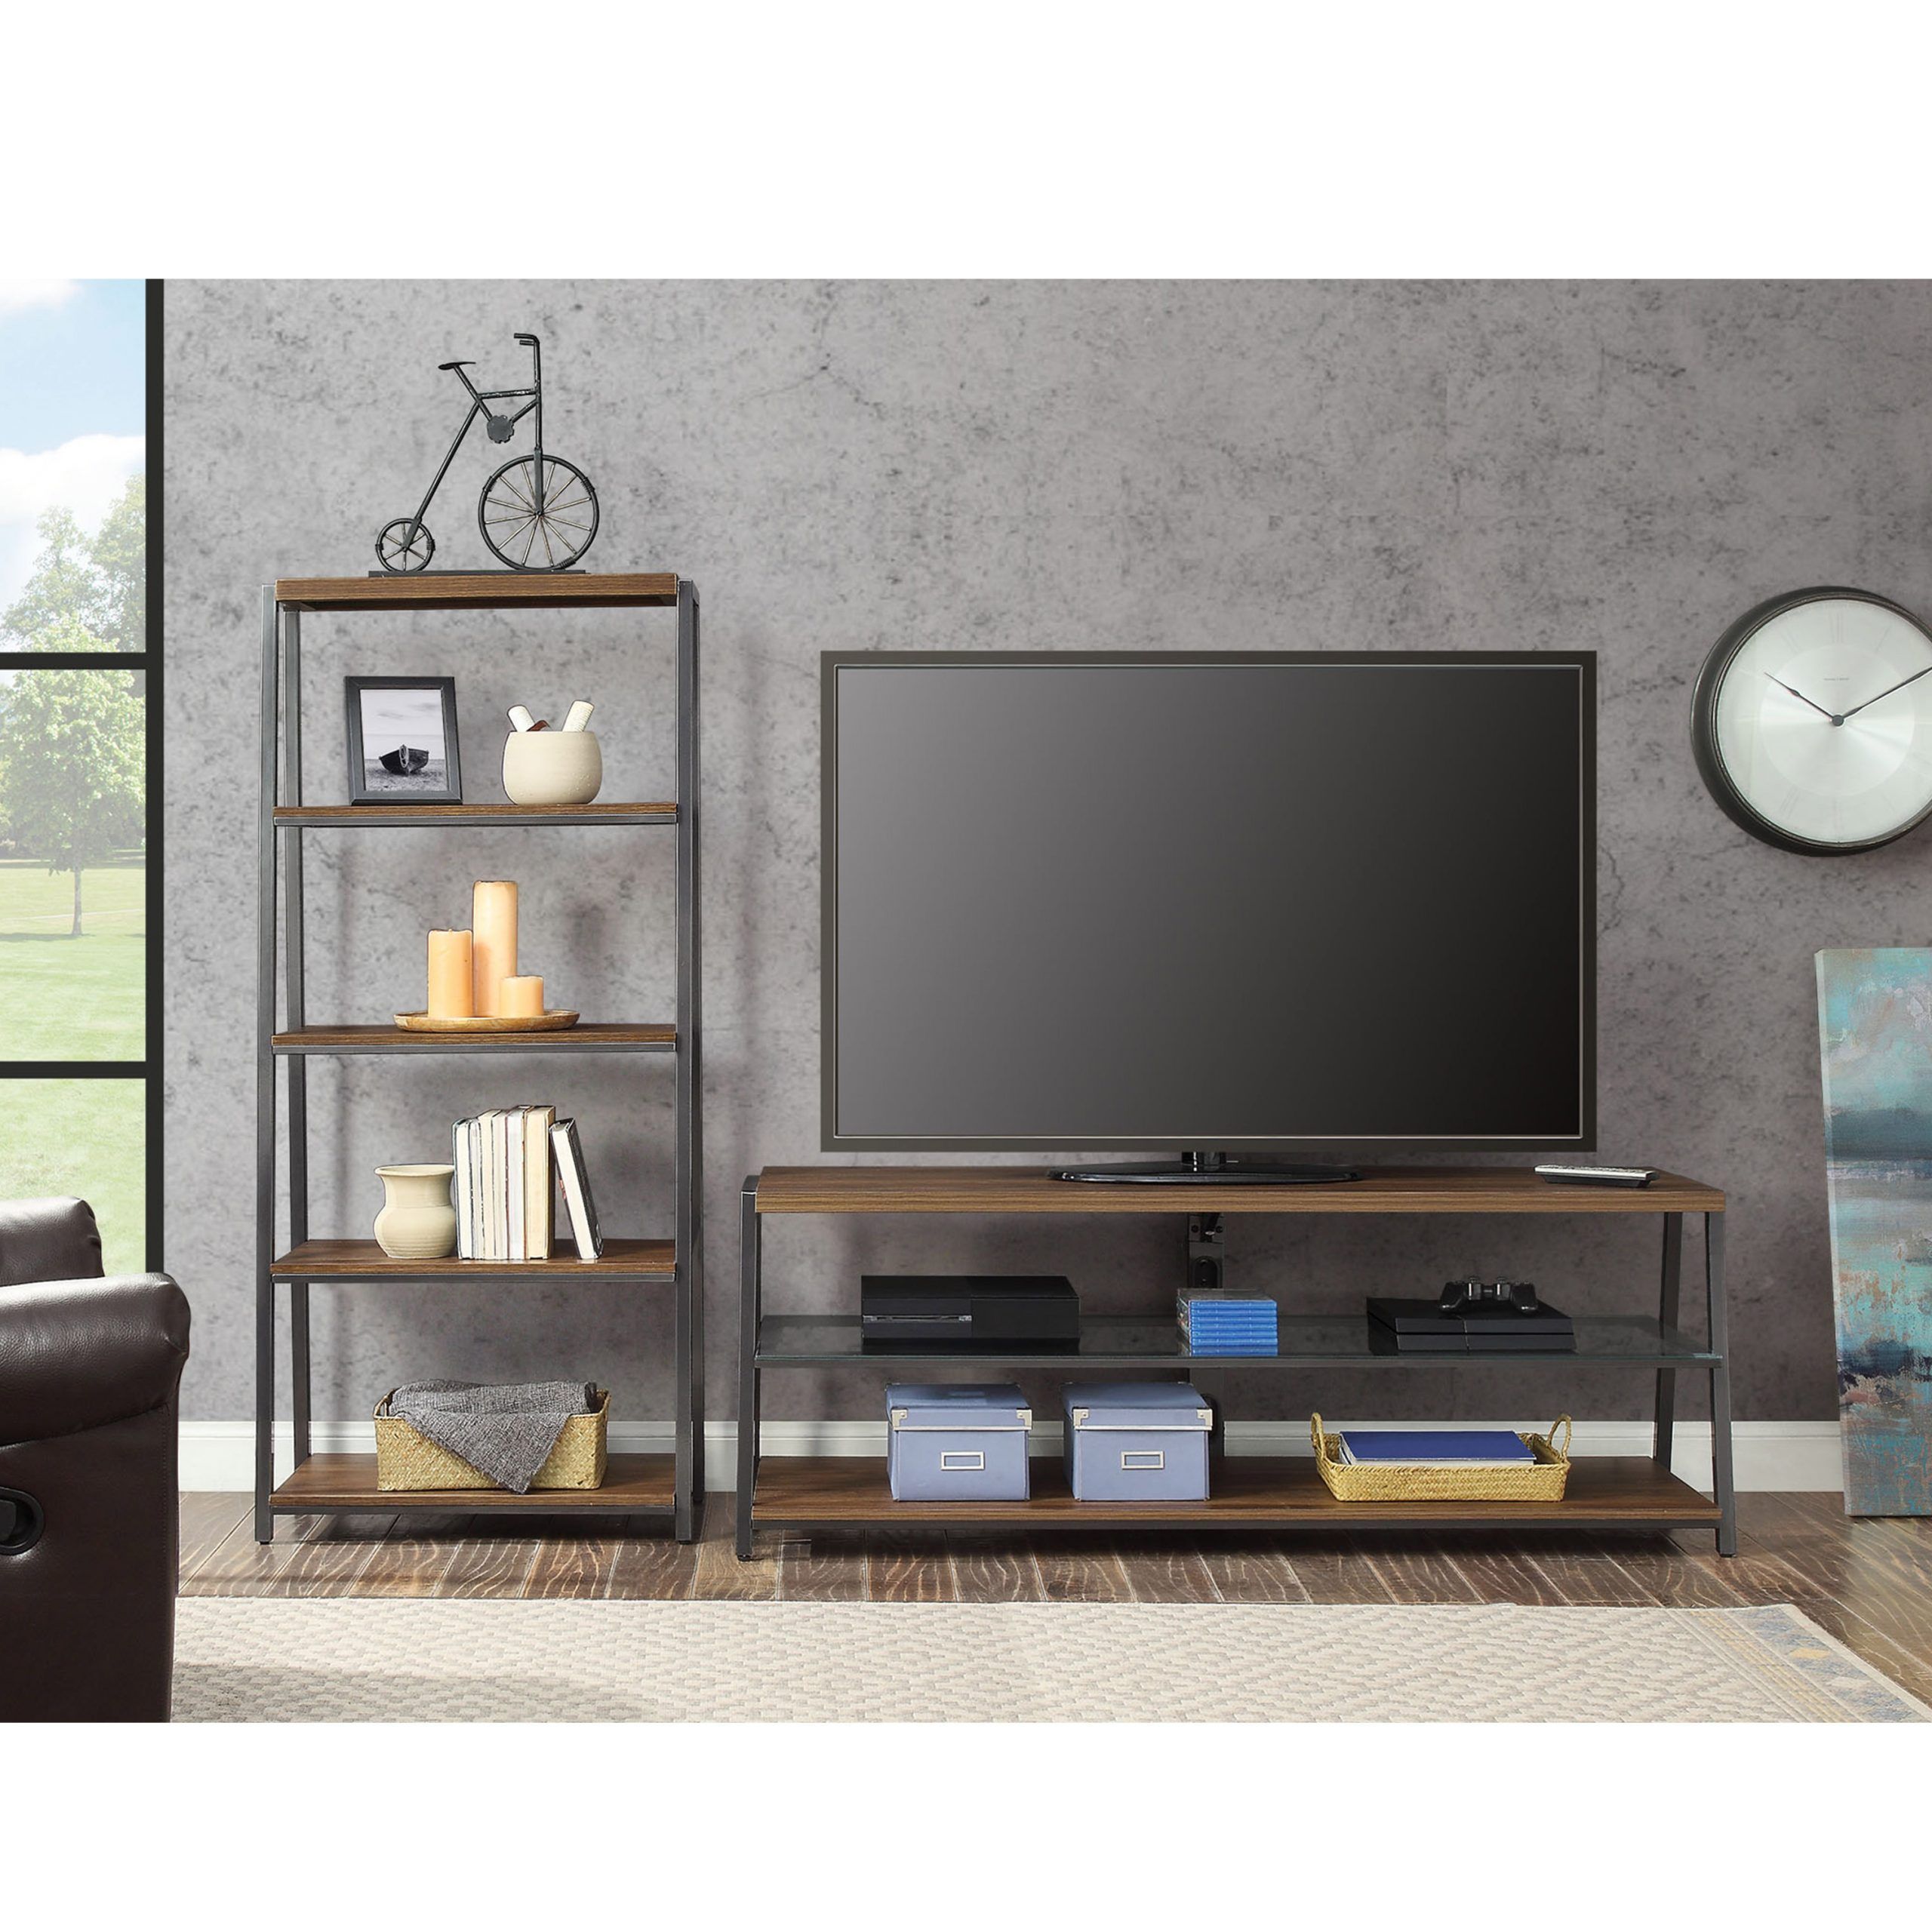 Mainstays Arris 3 In 1 Tv Stand And 4 Shelf Tower Book Pertaining To Mainstays Arris 3 In 1 Tv Stands In Canyon Walnut Finish (View 1 of 15)